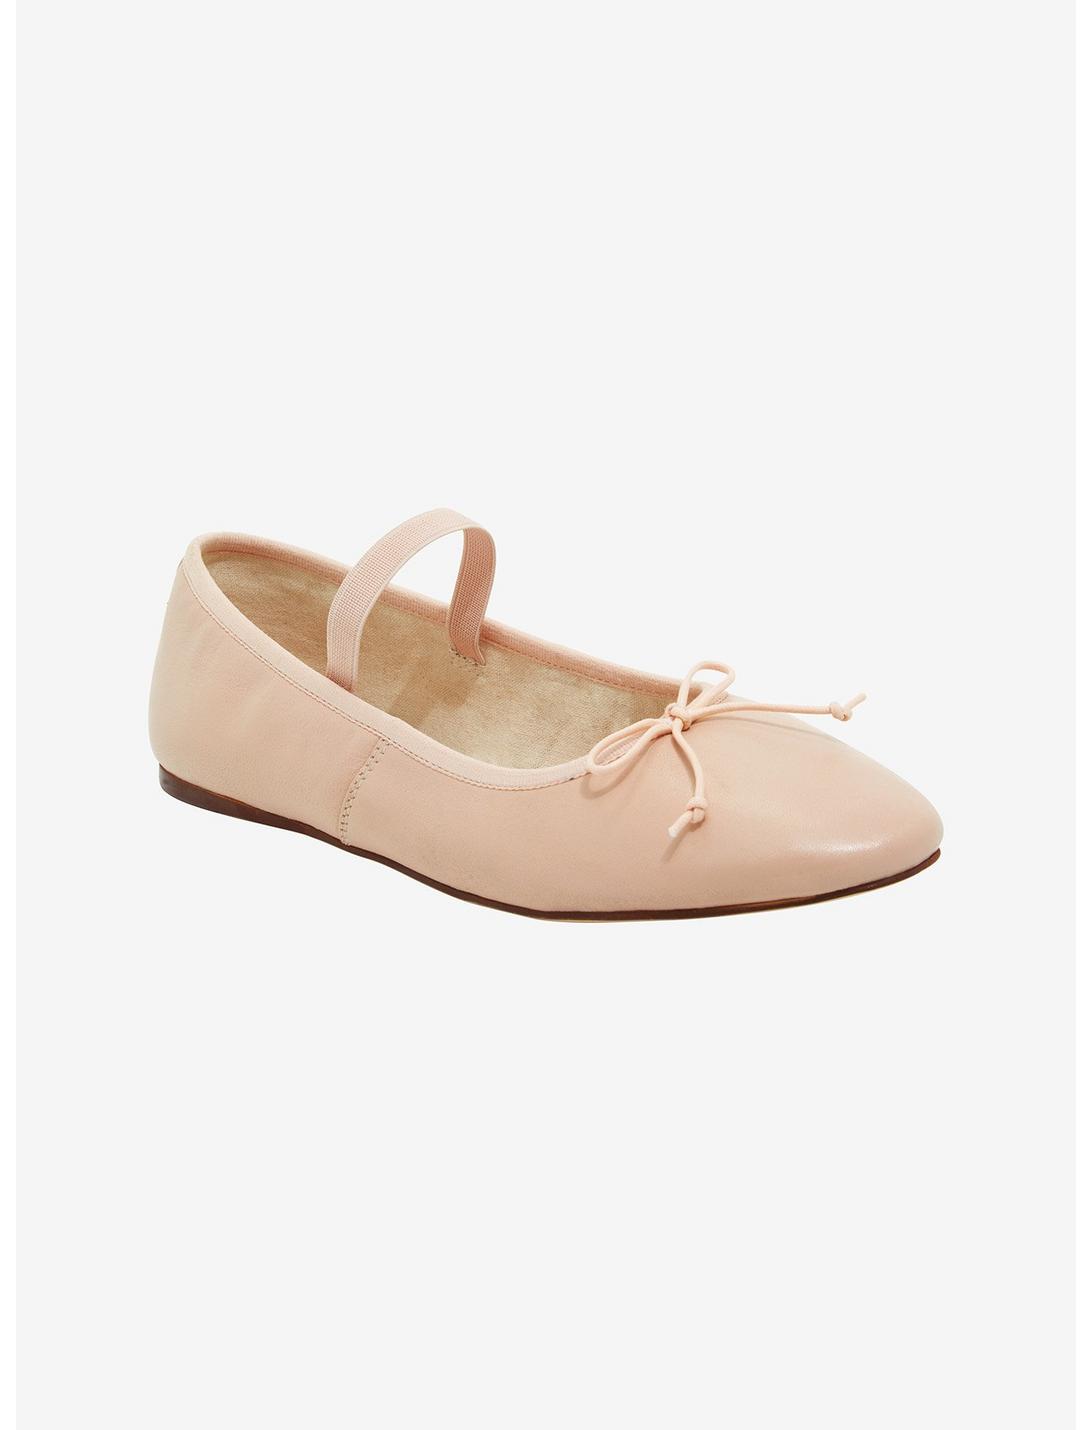 Chinese Laundry Pink Ballet Flats, MULTI, hi-res